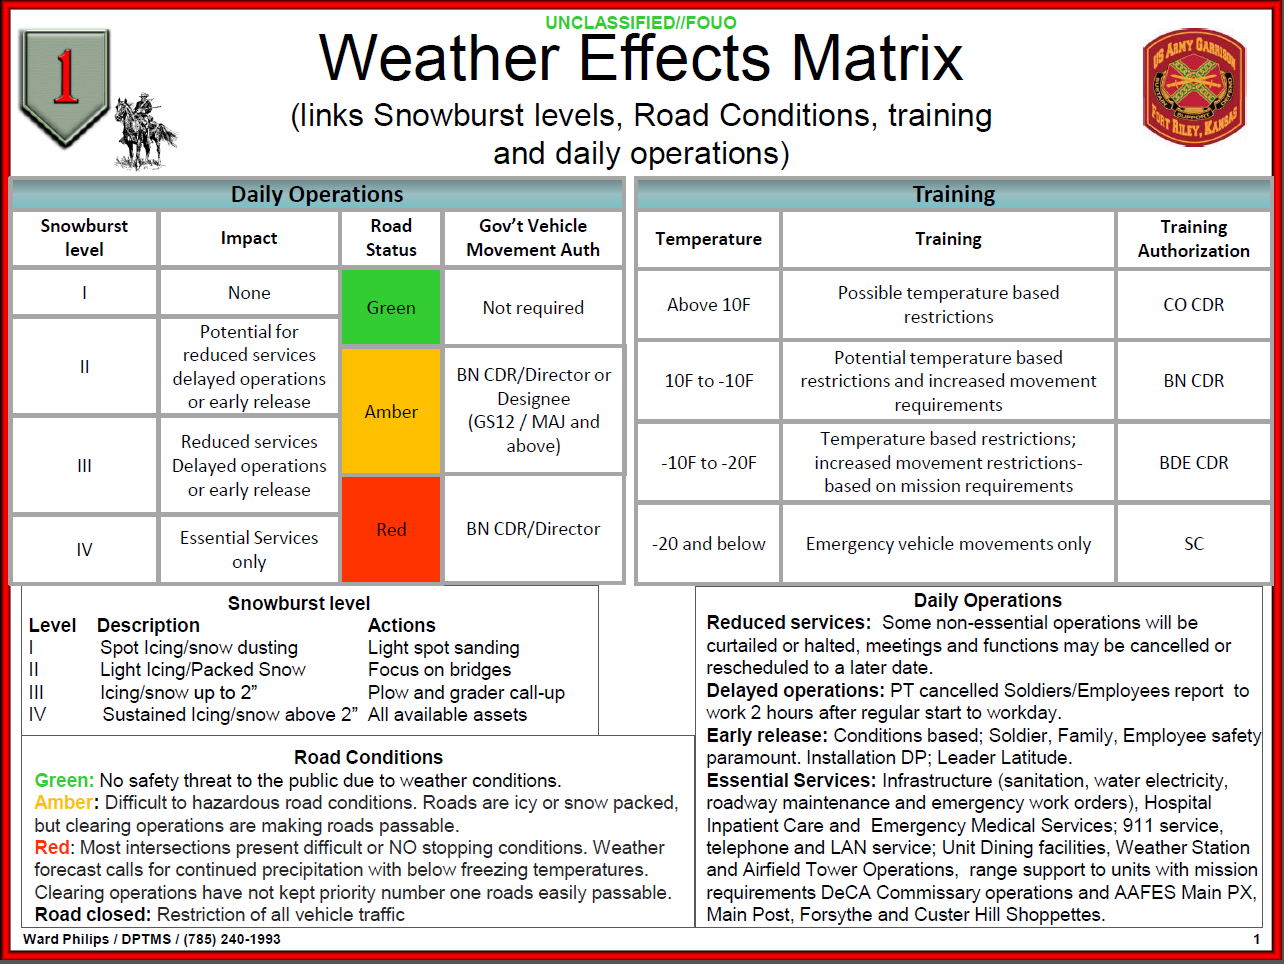 Army PT Uniform Weather Chart: Determining the Appropriate PT Uniform Based on Weather Conditions